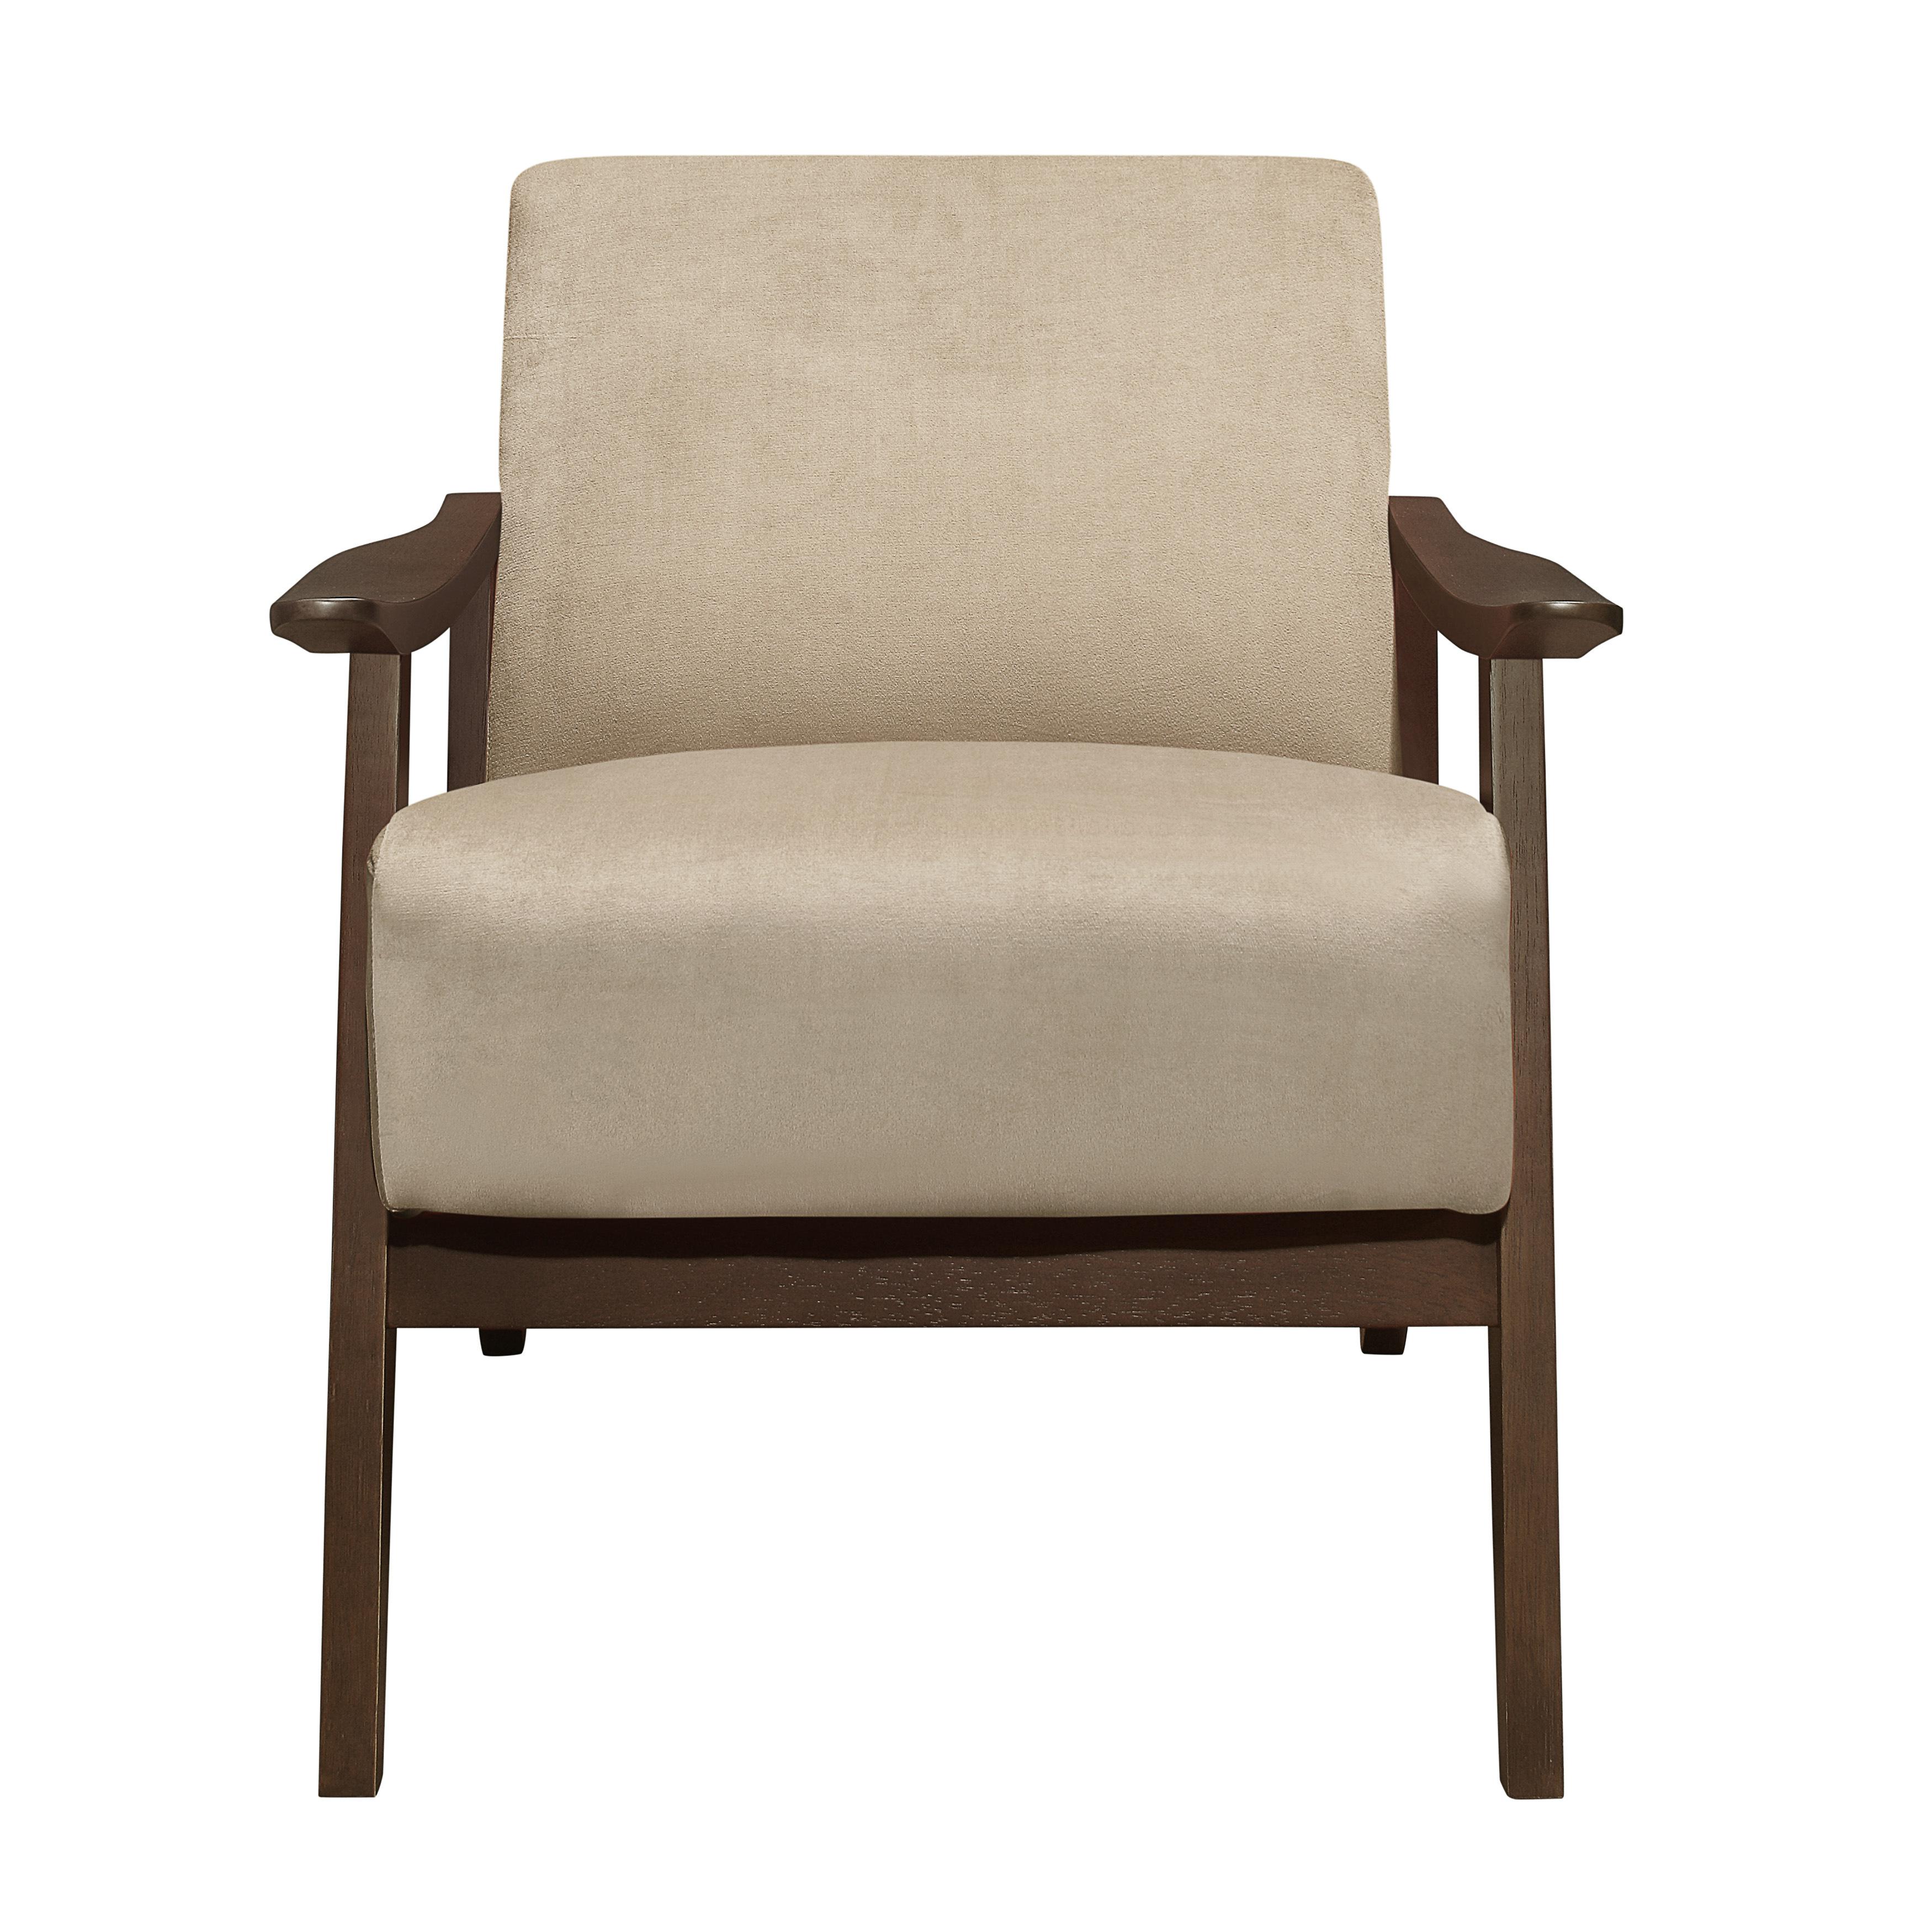 Transitional Accent Chair 1032BR-1 Carlson 1032BR-1 in Light Brown Velvet